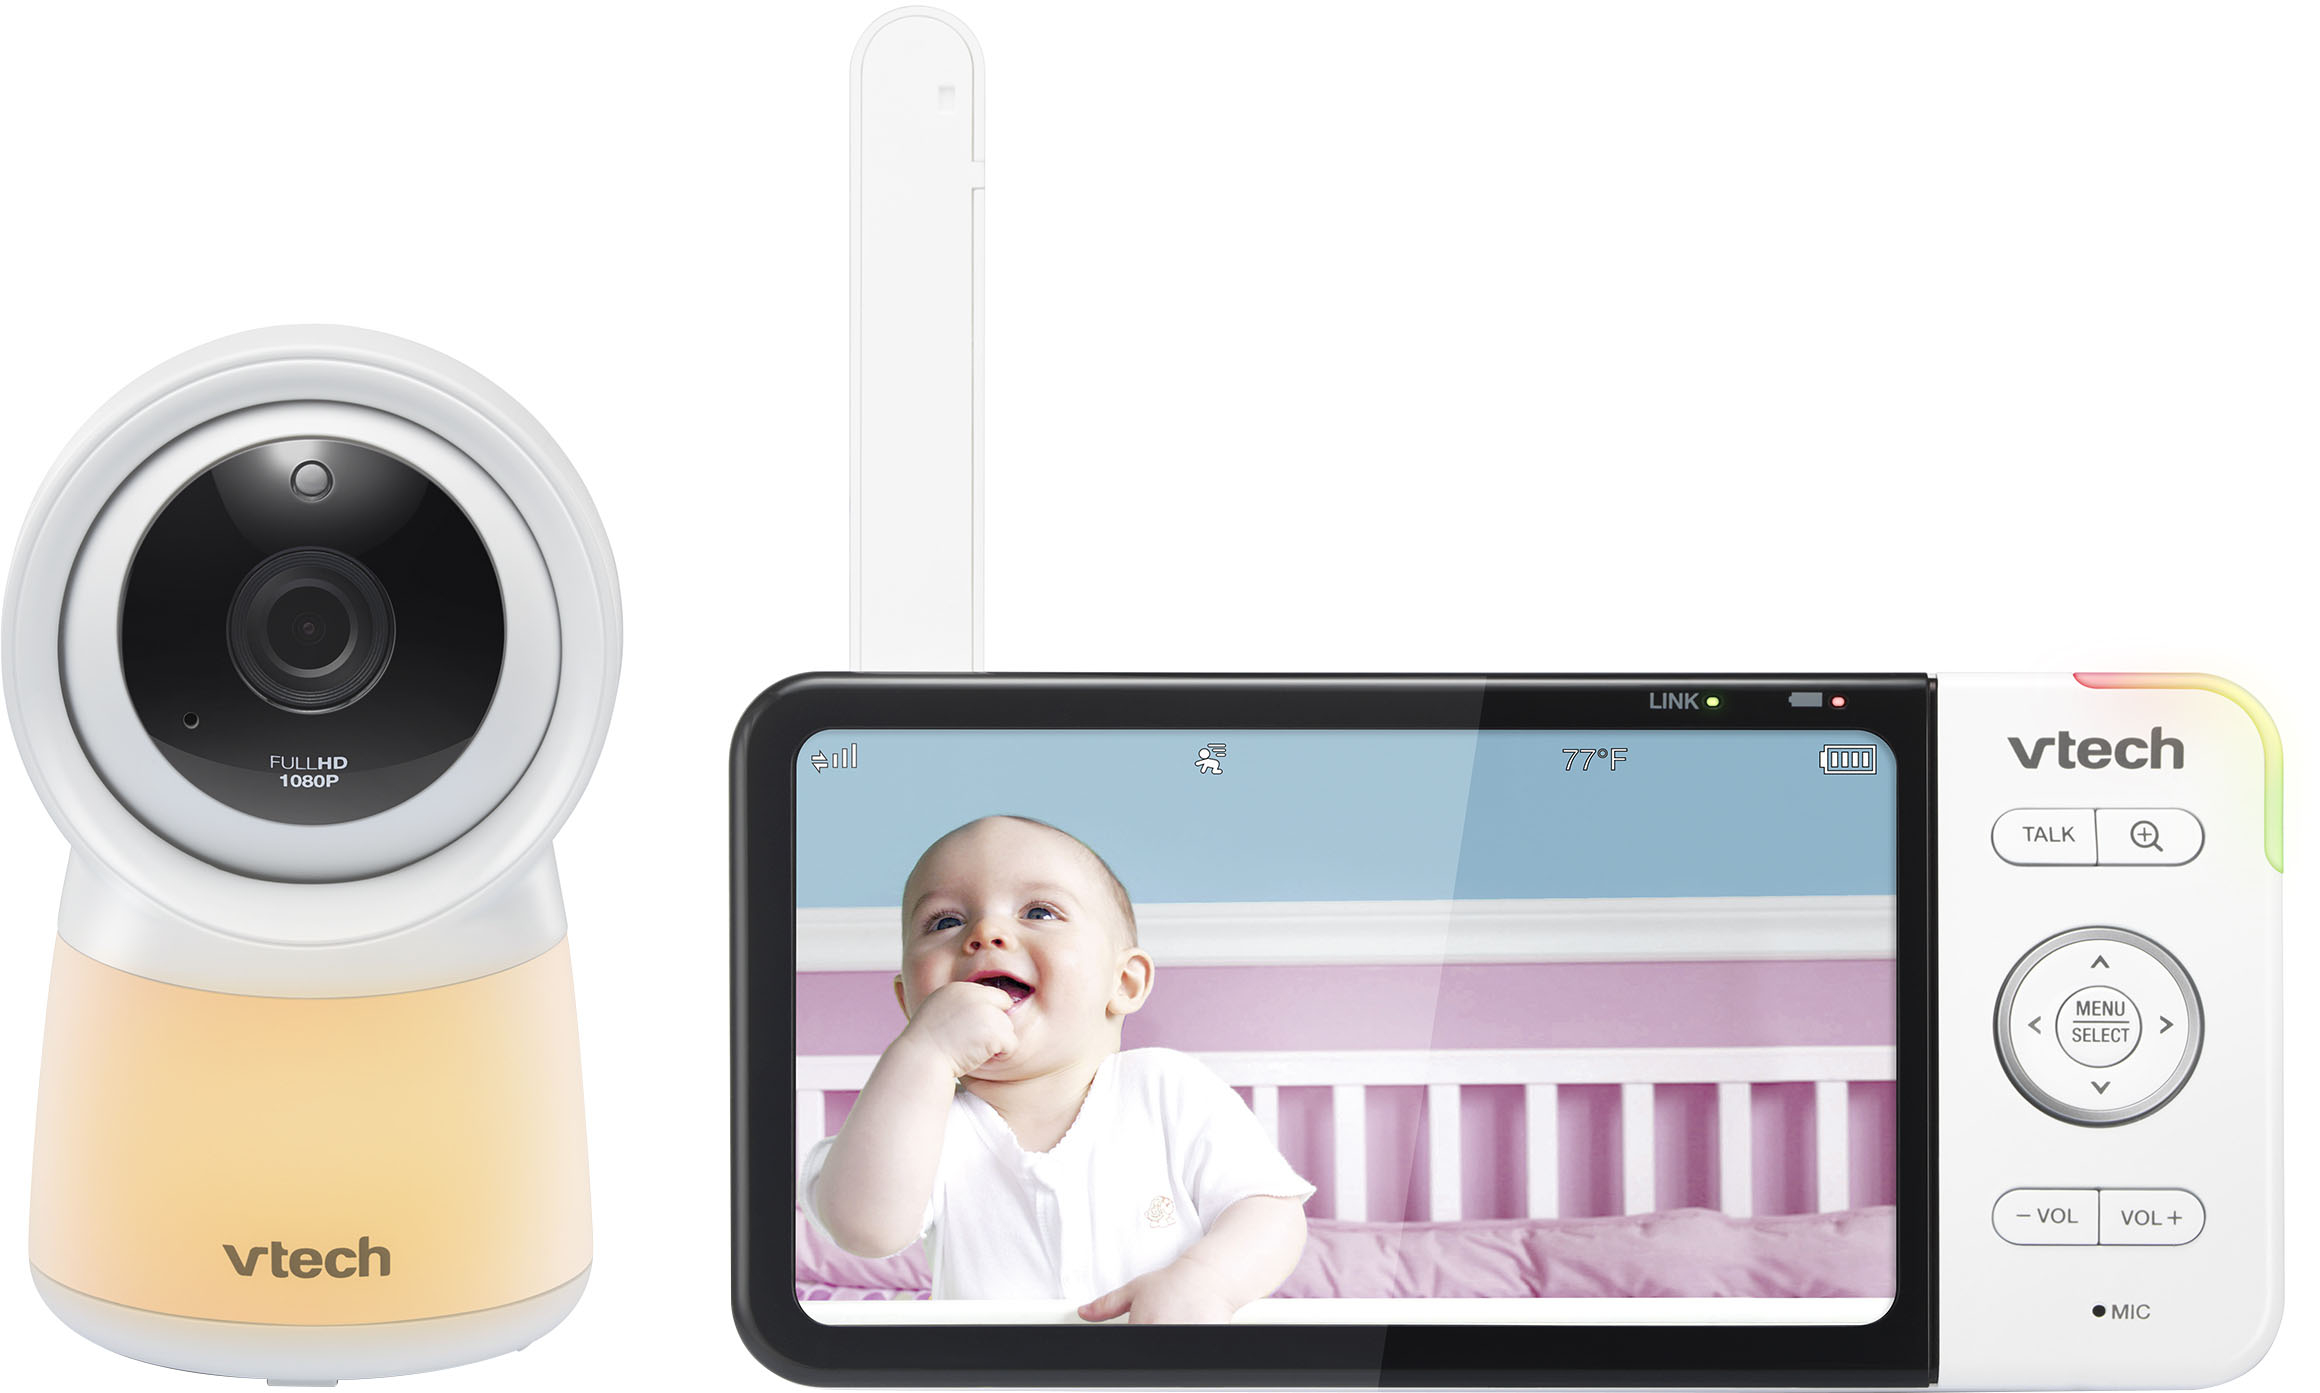 Questions And Answers Vtech Smart Wi Fi Video Baby Monitor W 5 Hc Display And 1080p Hd Camera Built In Night Light Rm5754hd White White Rm5754hd Best Buy